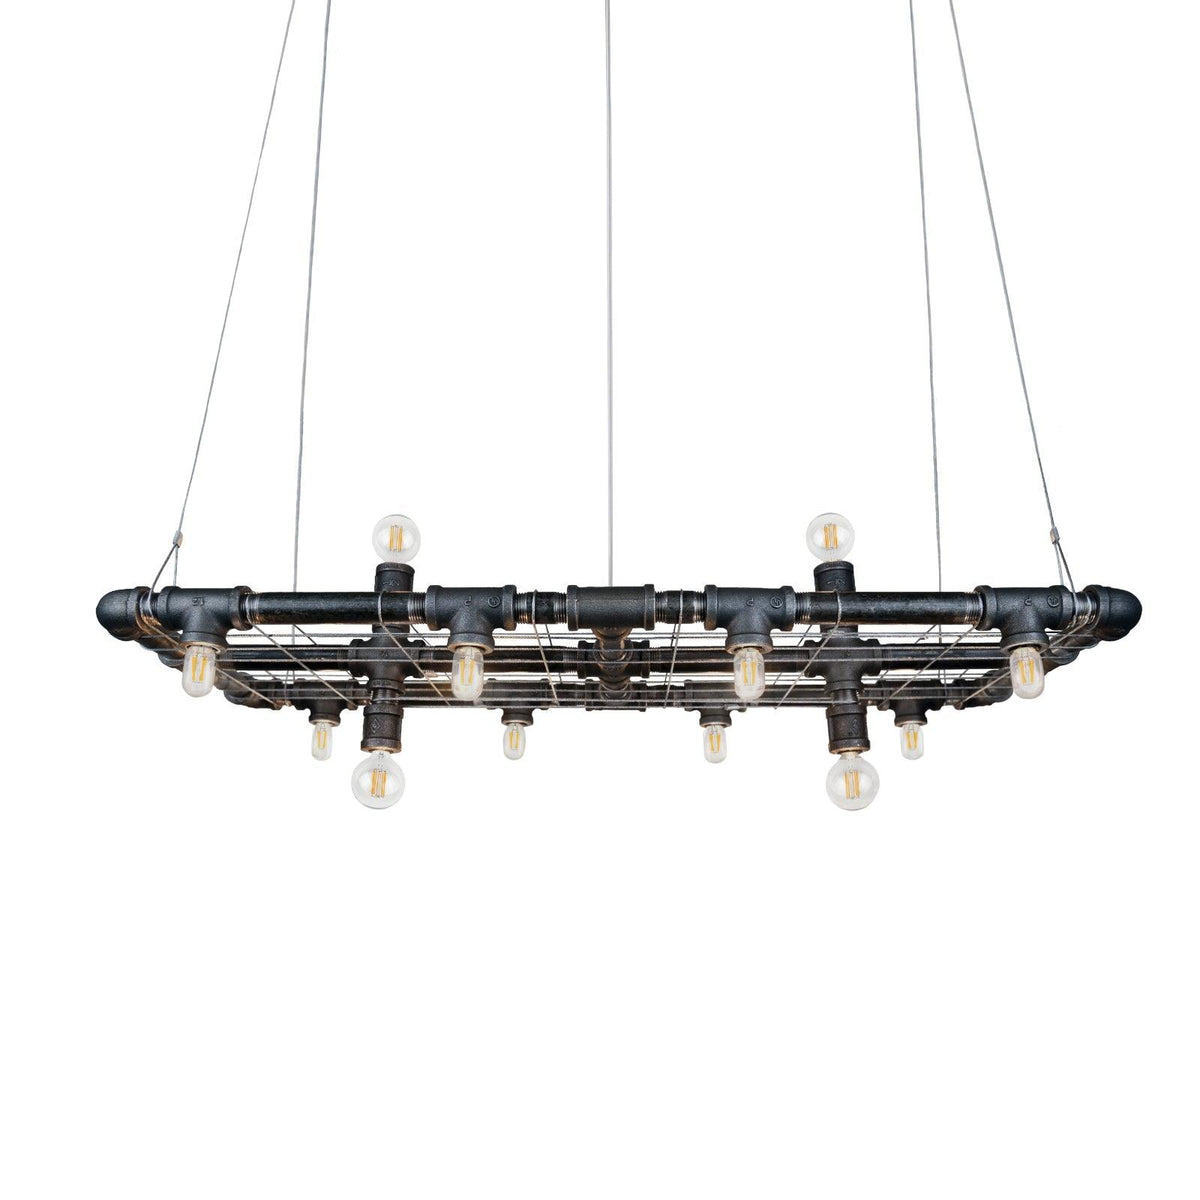 Michael Mchale Designs - Raw Banqueting Linear Suspension - RAW-1 | Montreal Lighting & Hardware